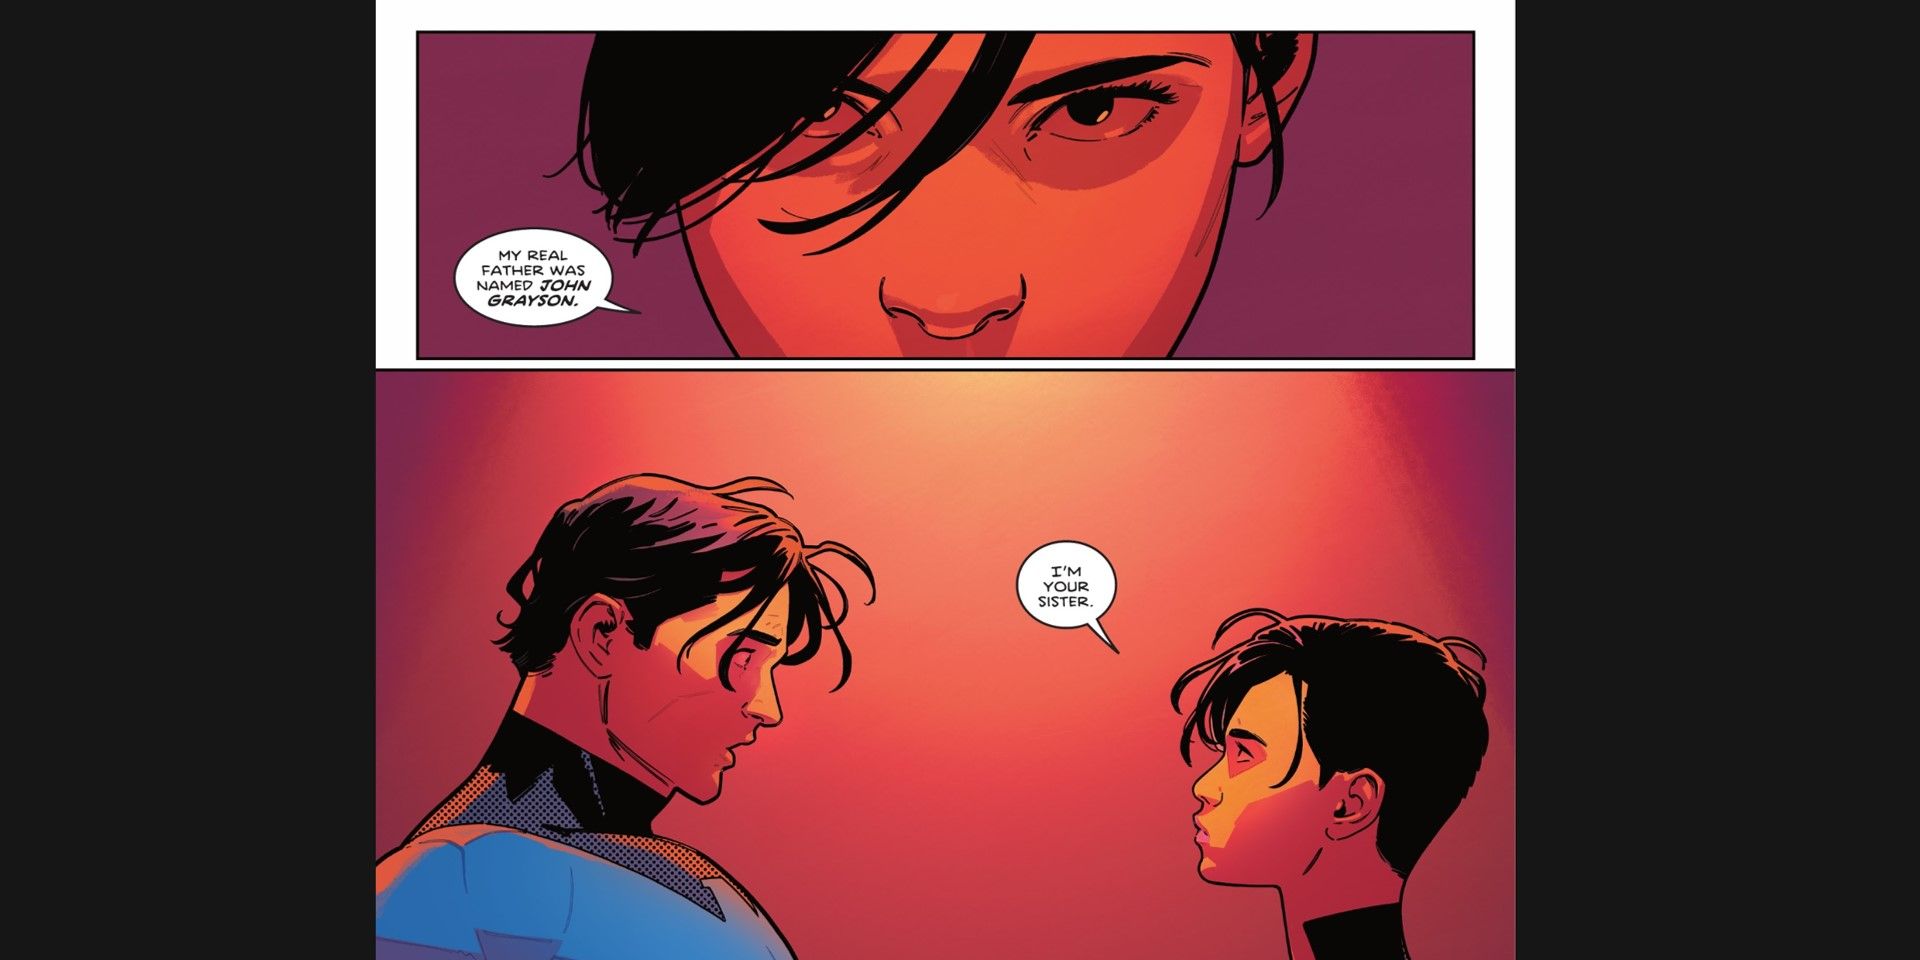 Melinda Zucco and Nightwing facing each other in DC Comics